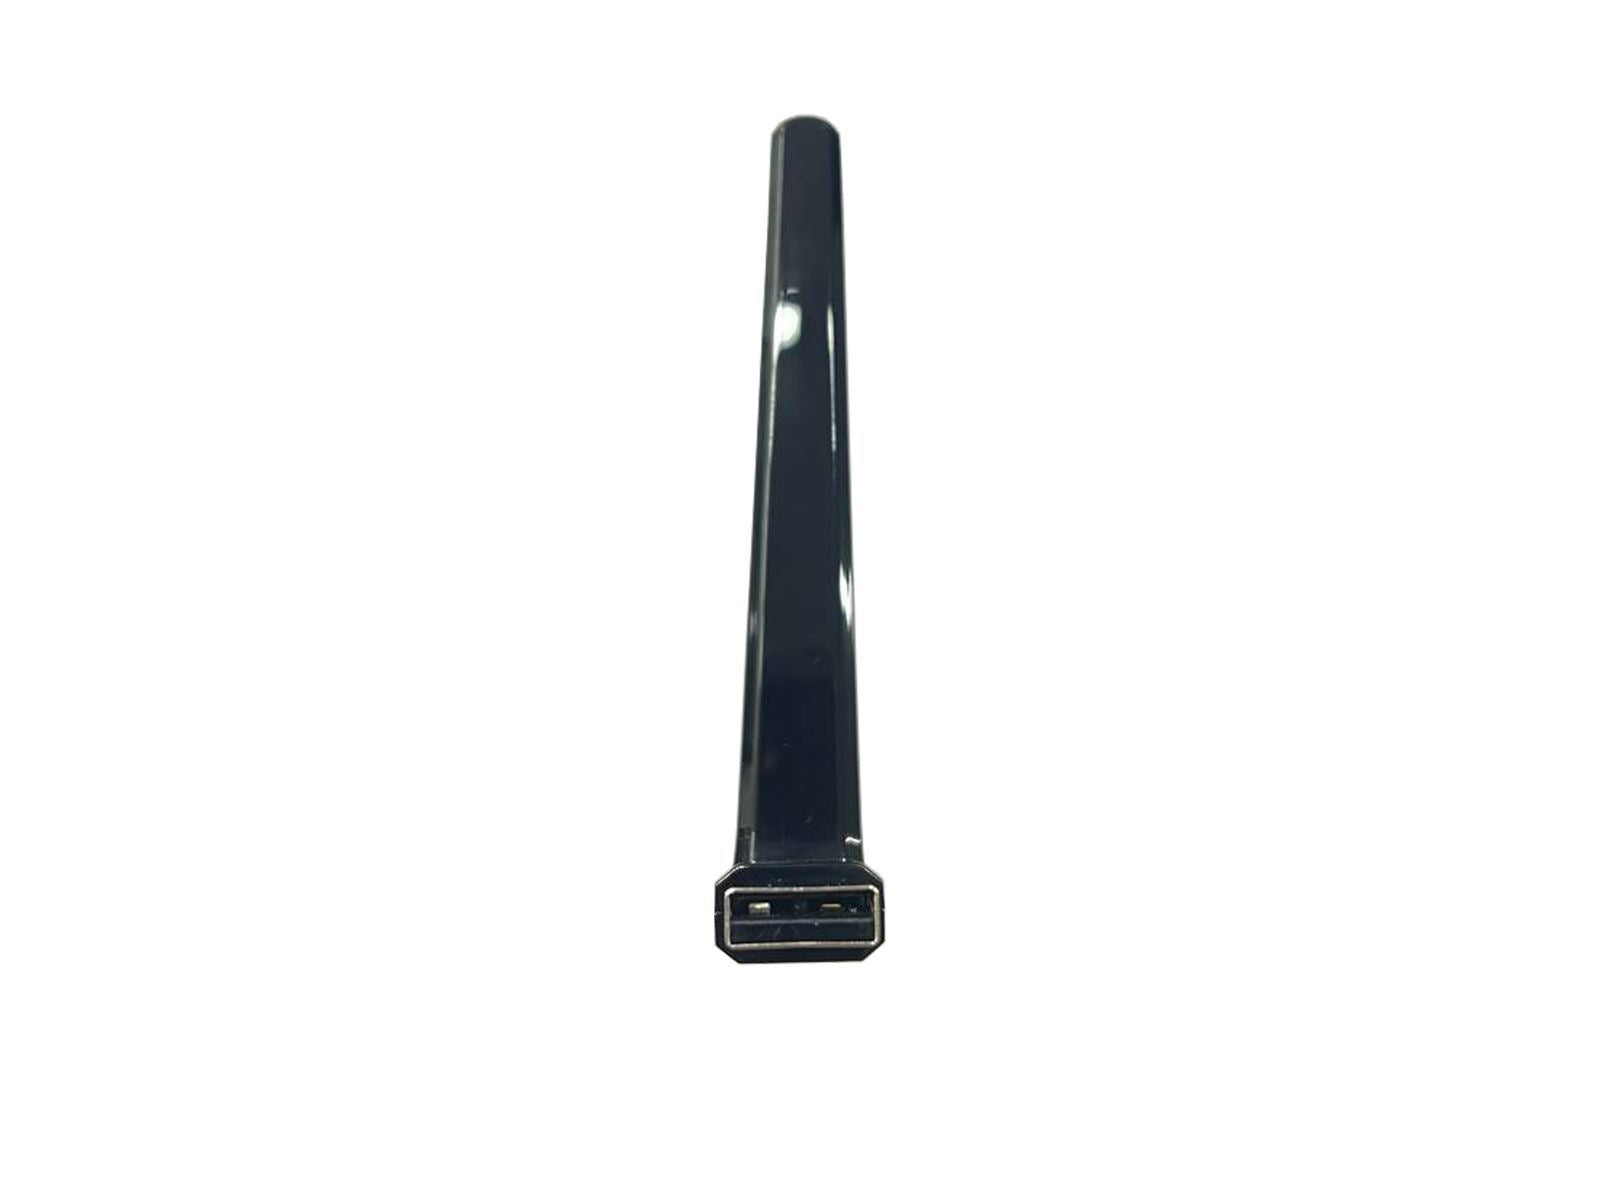 USB Wifi Dongle Front View Angled 